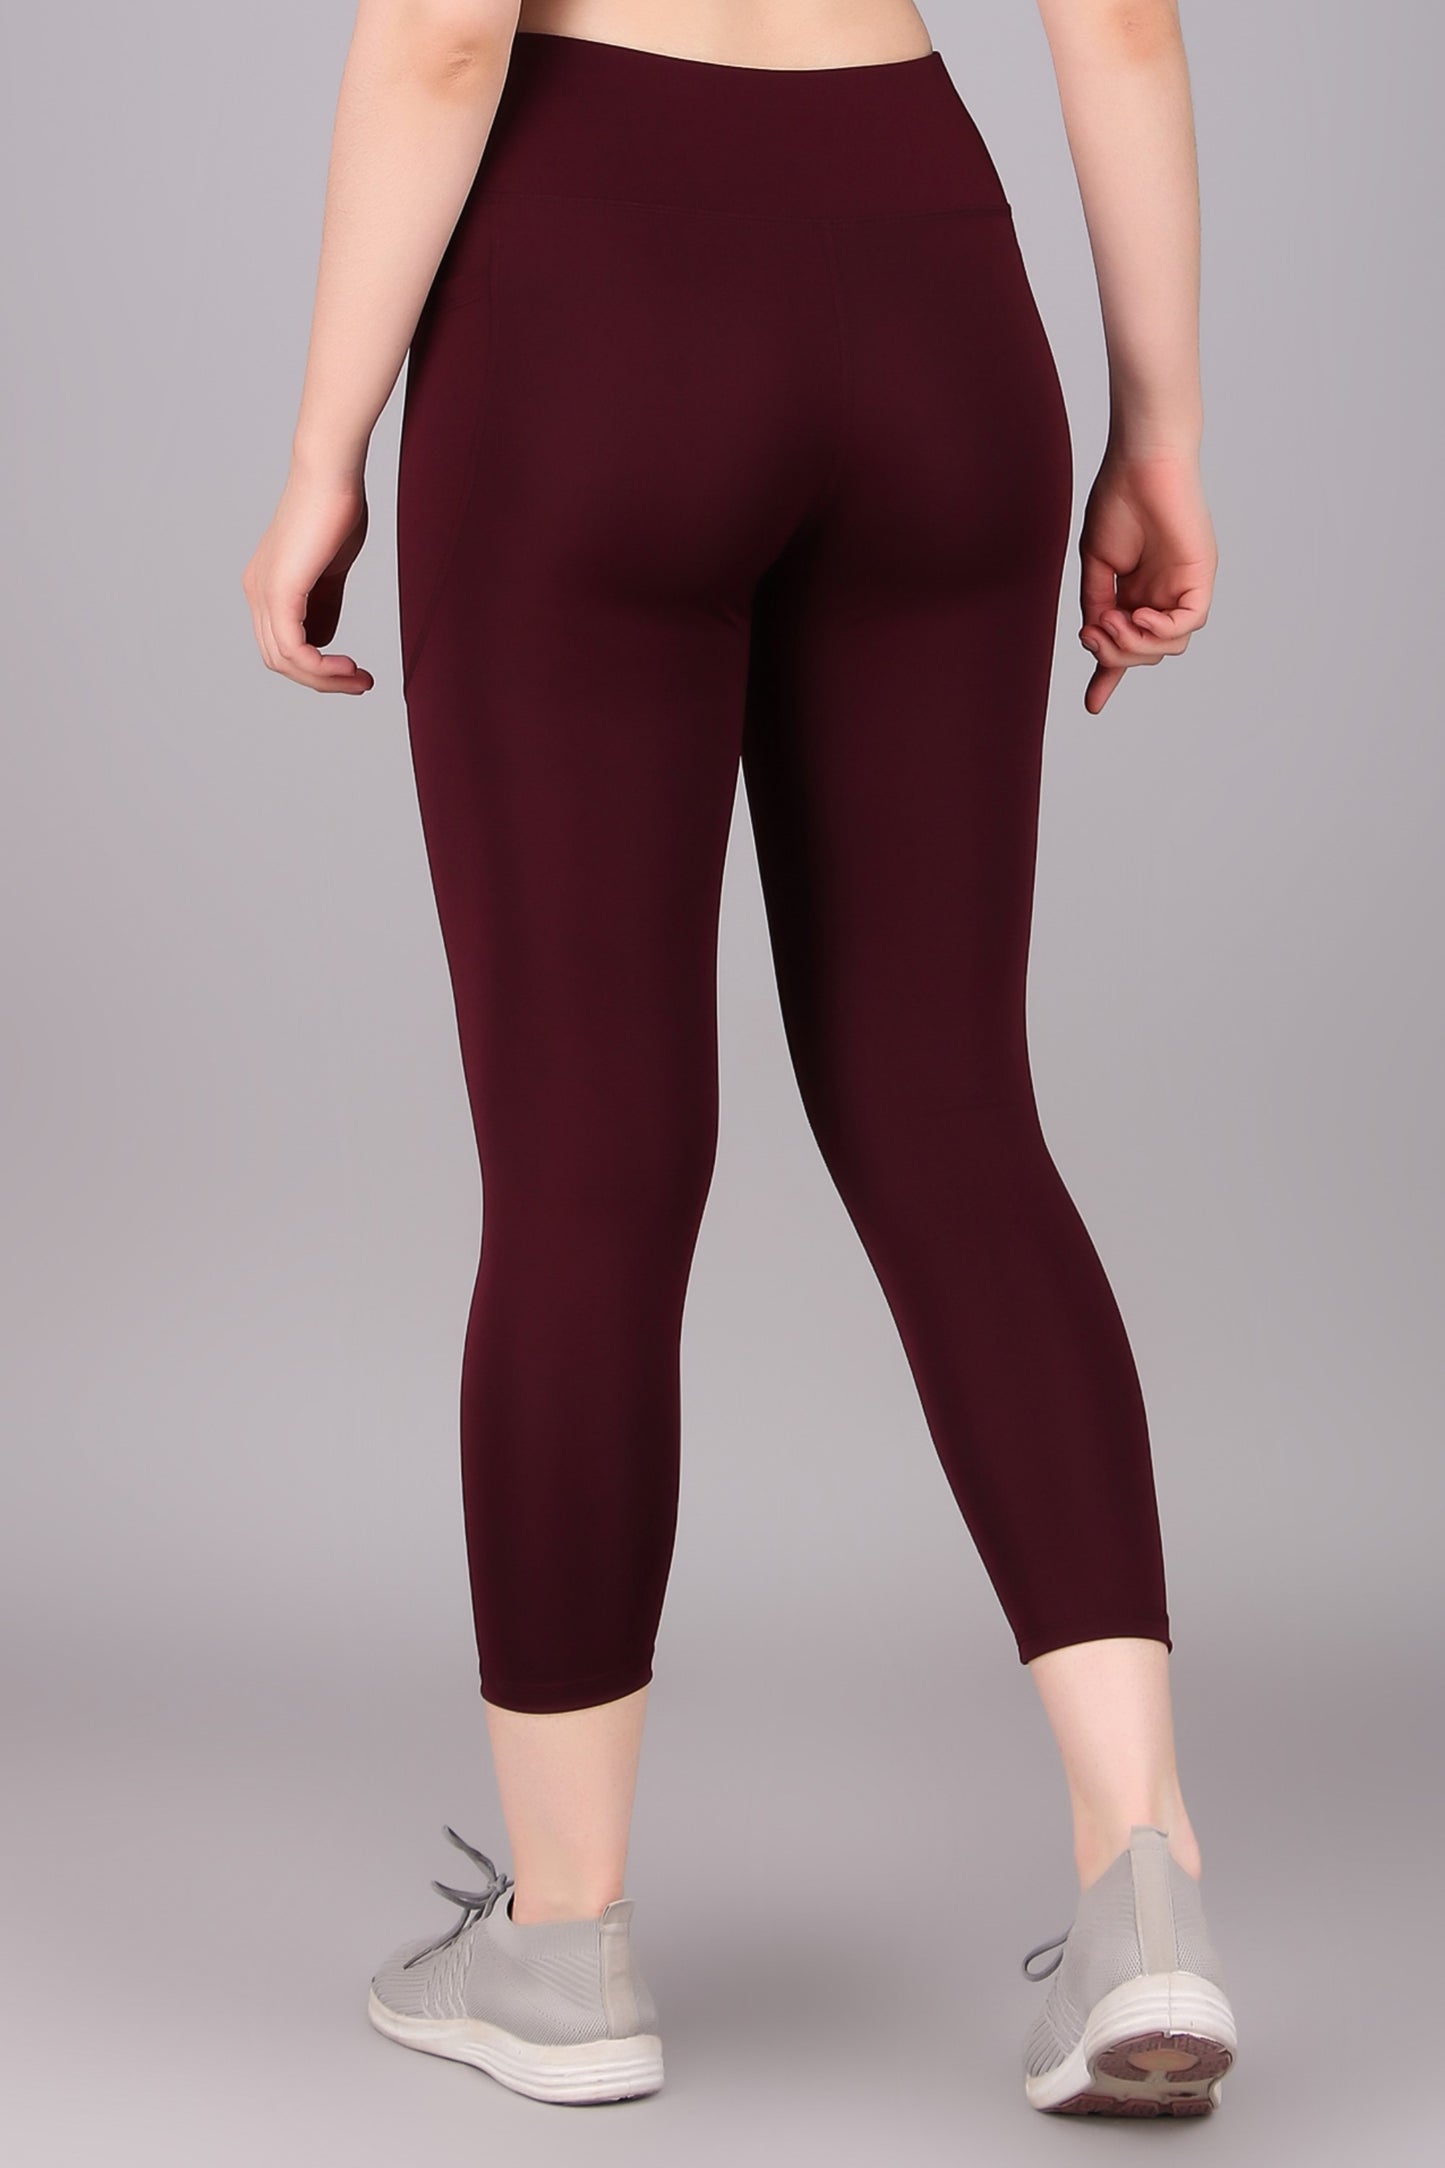 The Ultimate Solid High Waist Gym, Yoga Tights and leggings - Wine